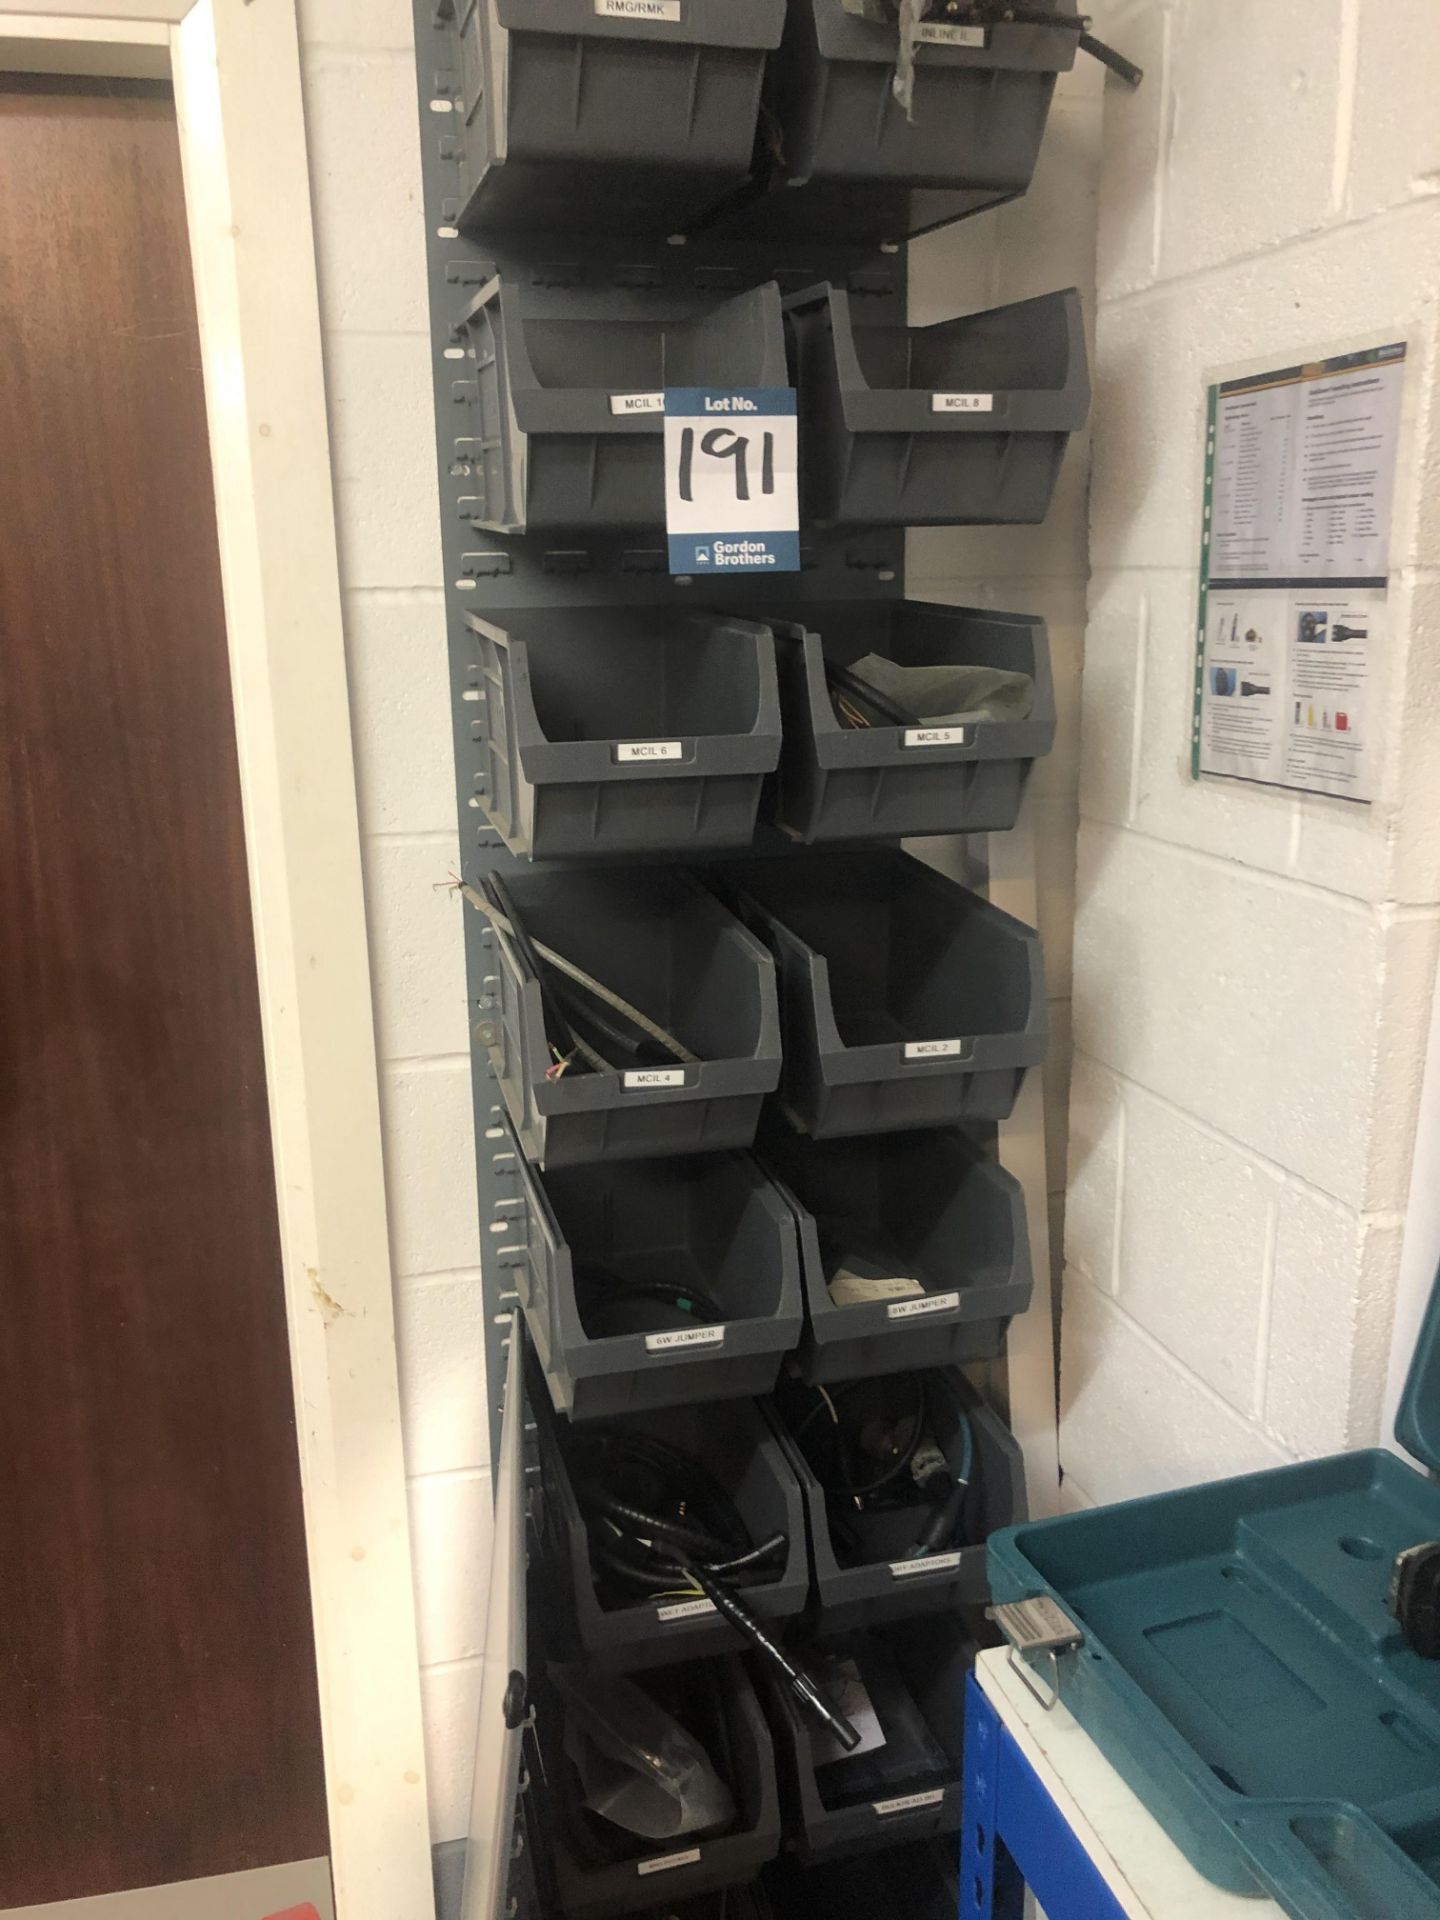 Miscellaneous under water connectors (sub-comms), bins and louvre wall mount